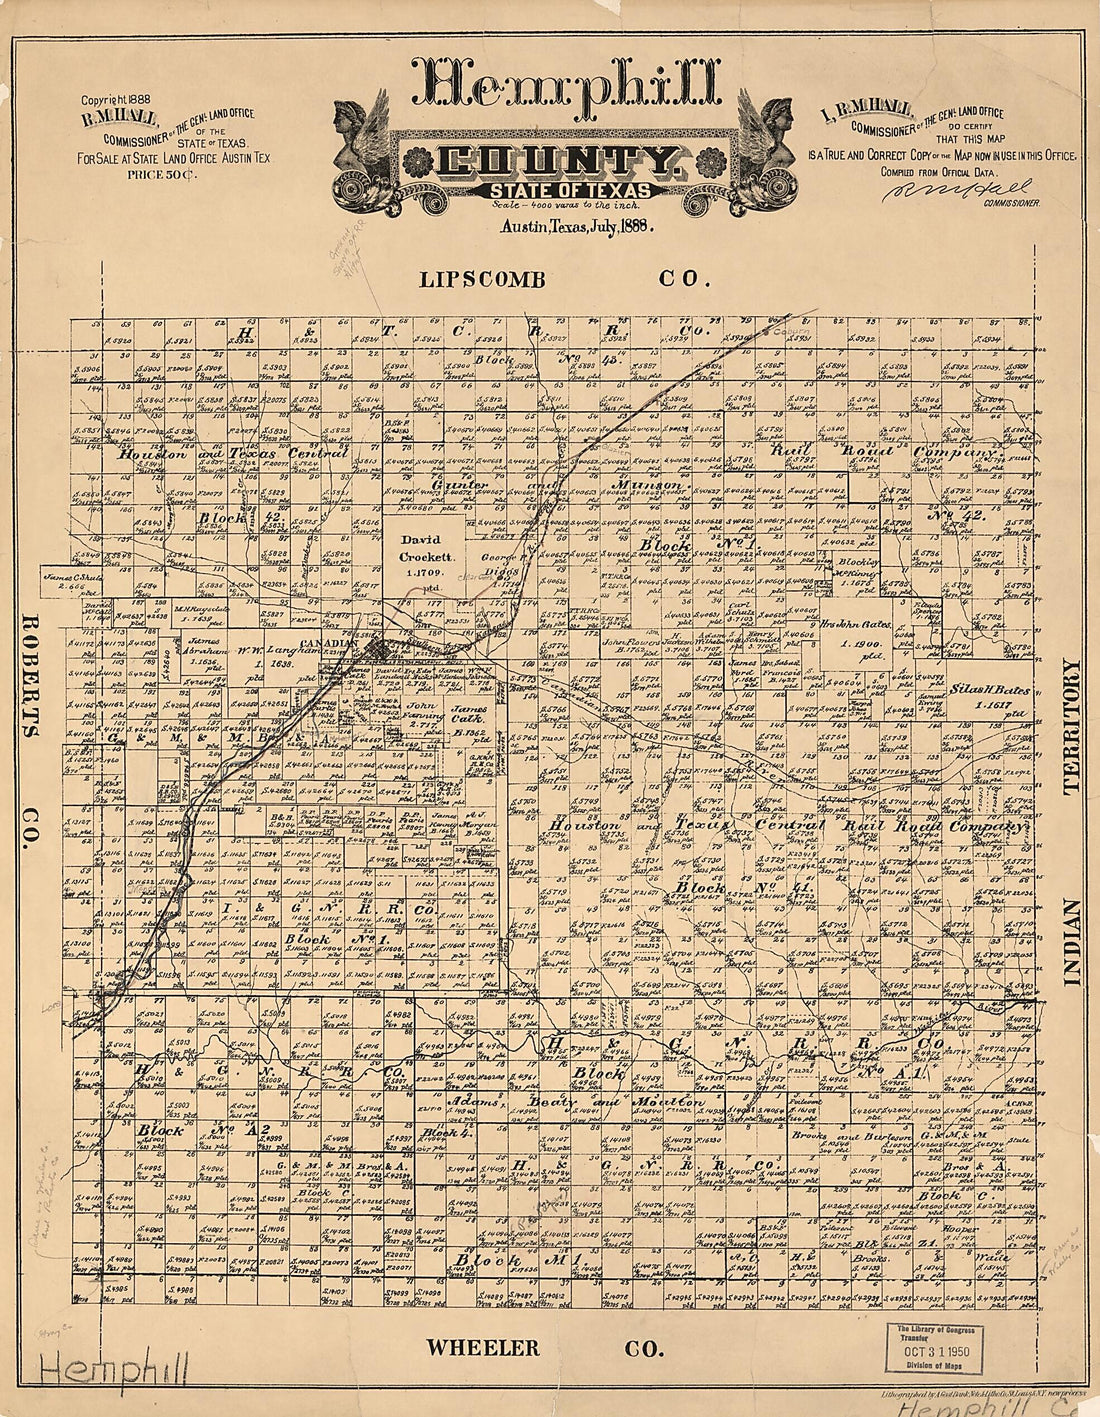 This old map of Hemphill County, State of Texas from 1888 was created by R. M. Hall in 1888